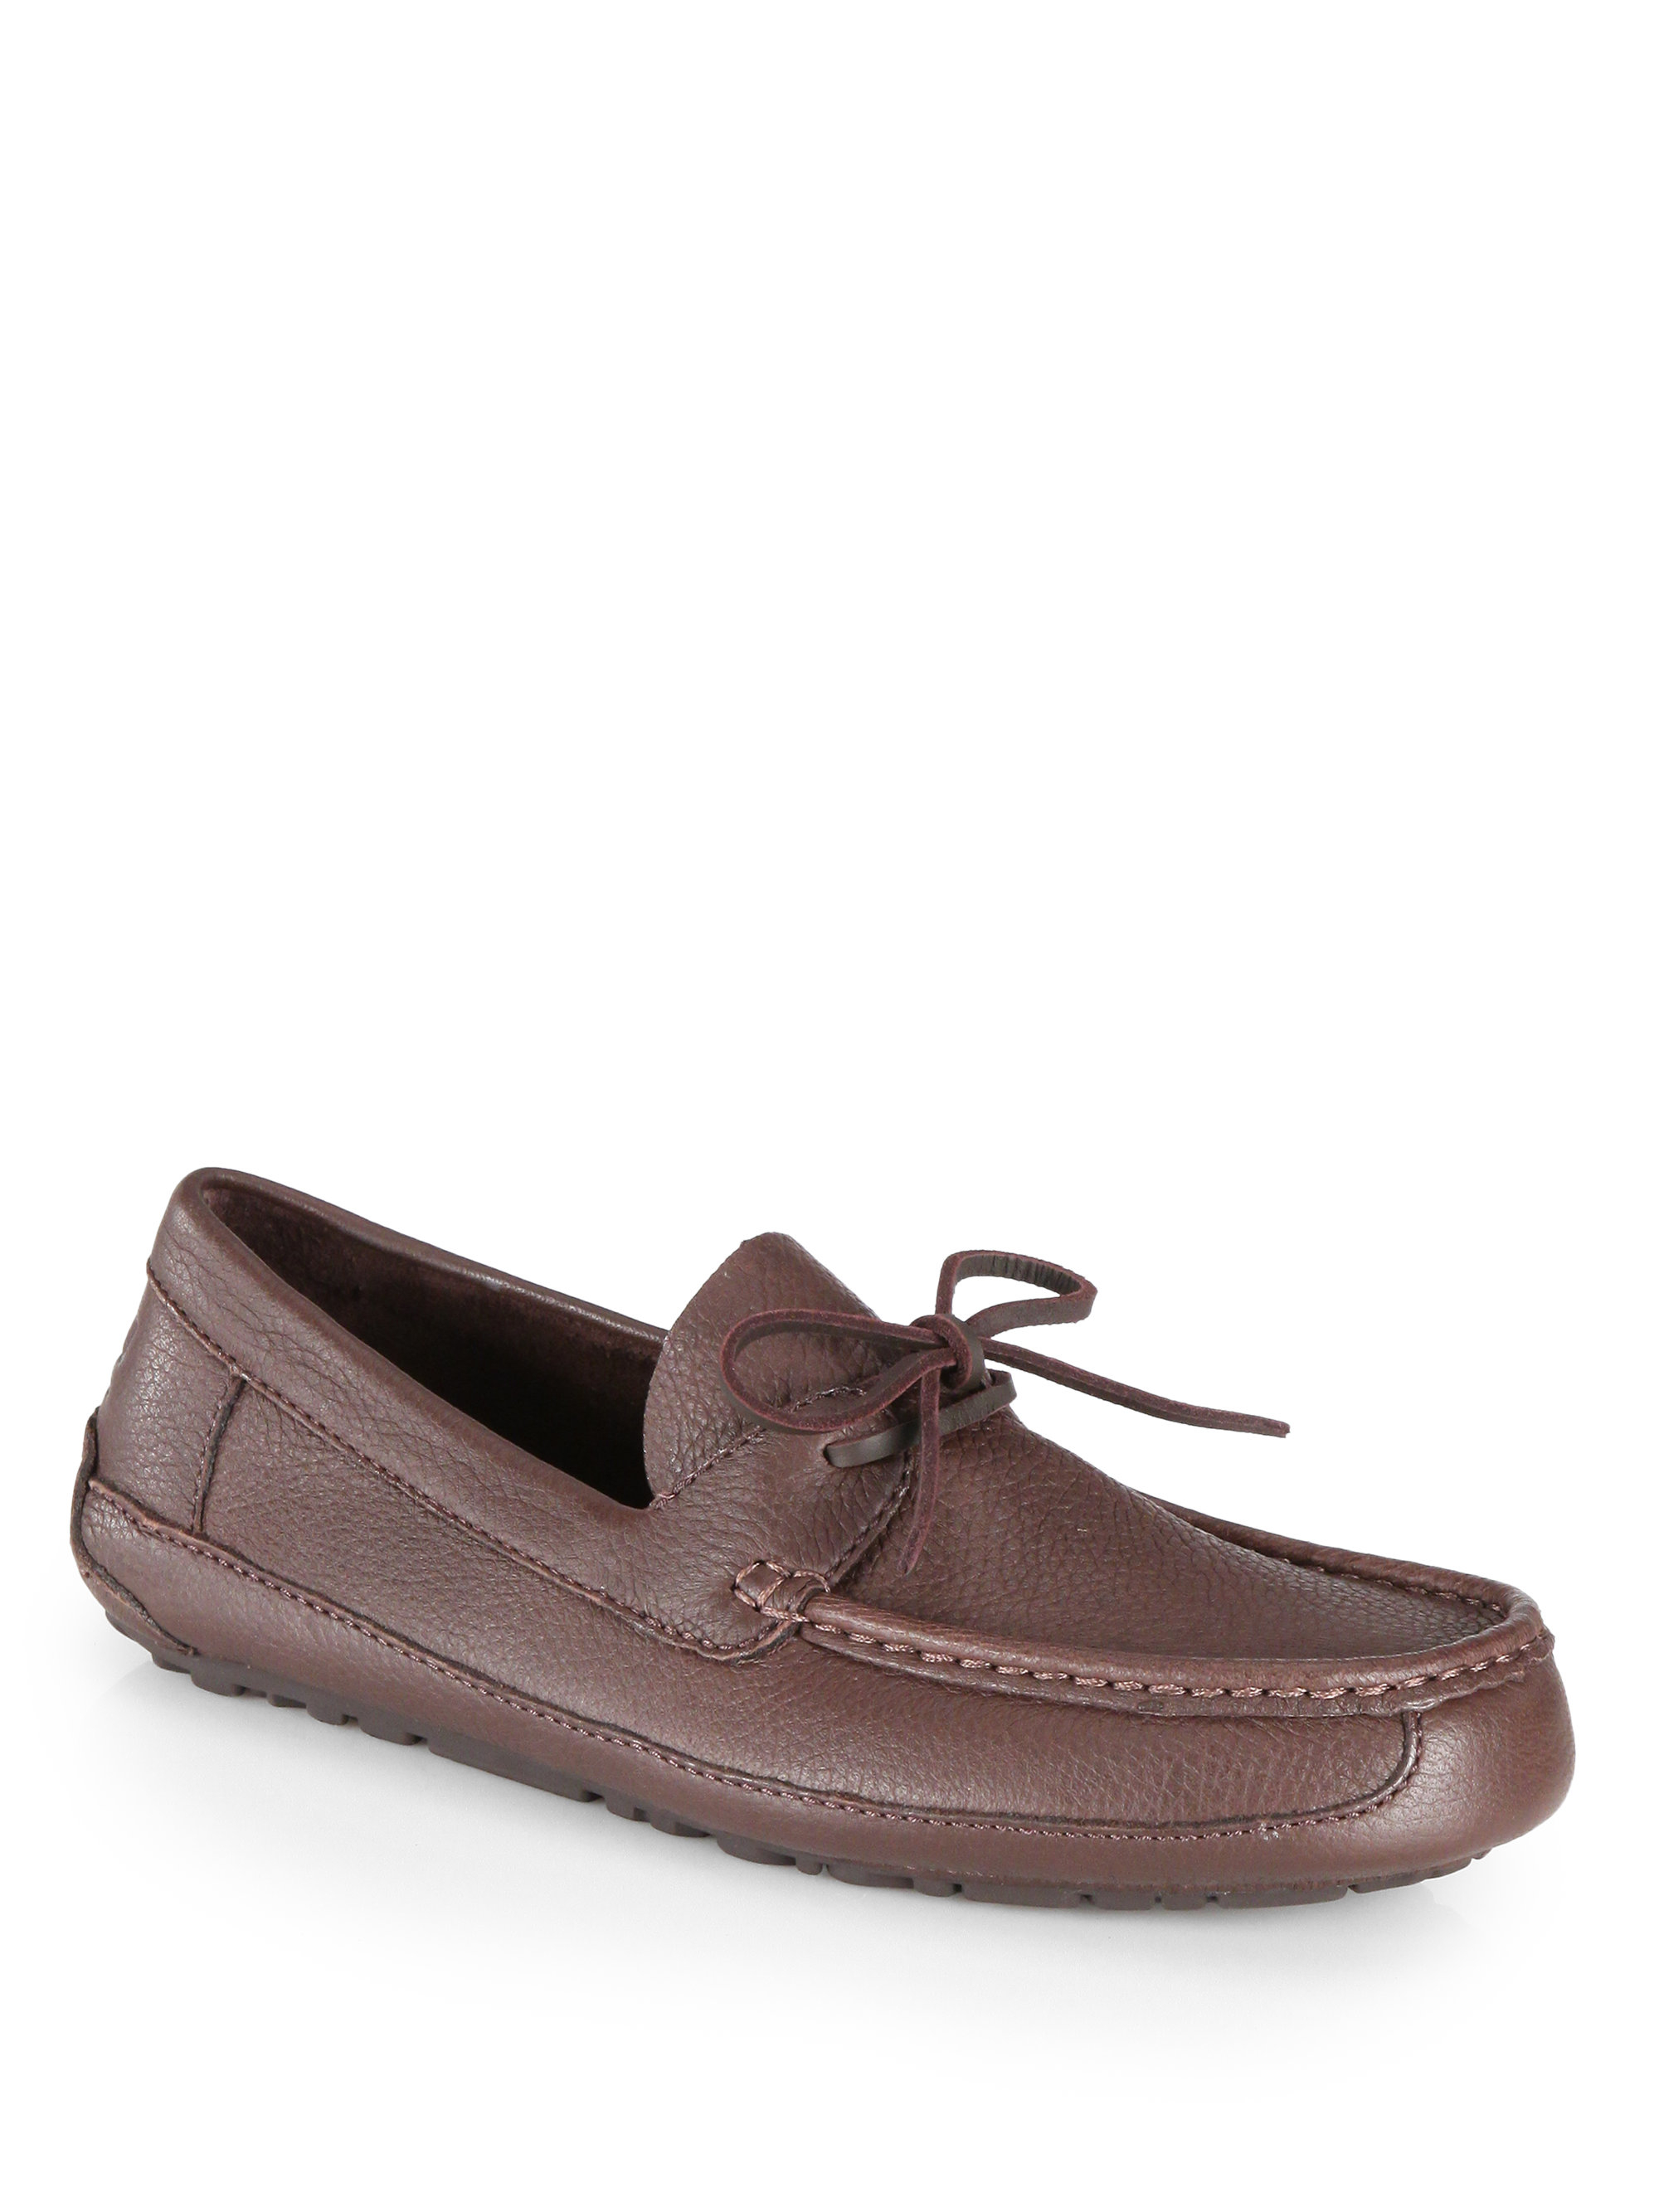 Ugg Marlowe Leather Slip-on Drivers in Brown for Men (STOUT) | Lyst